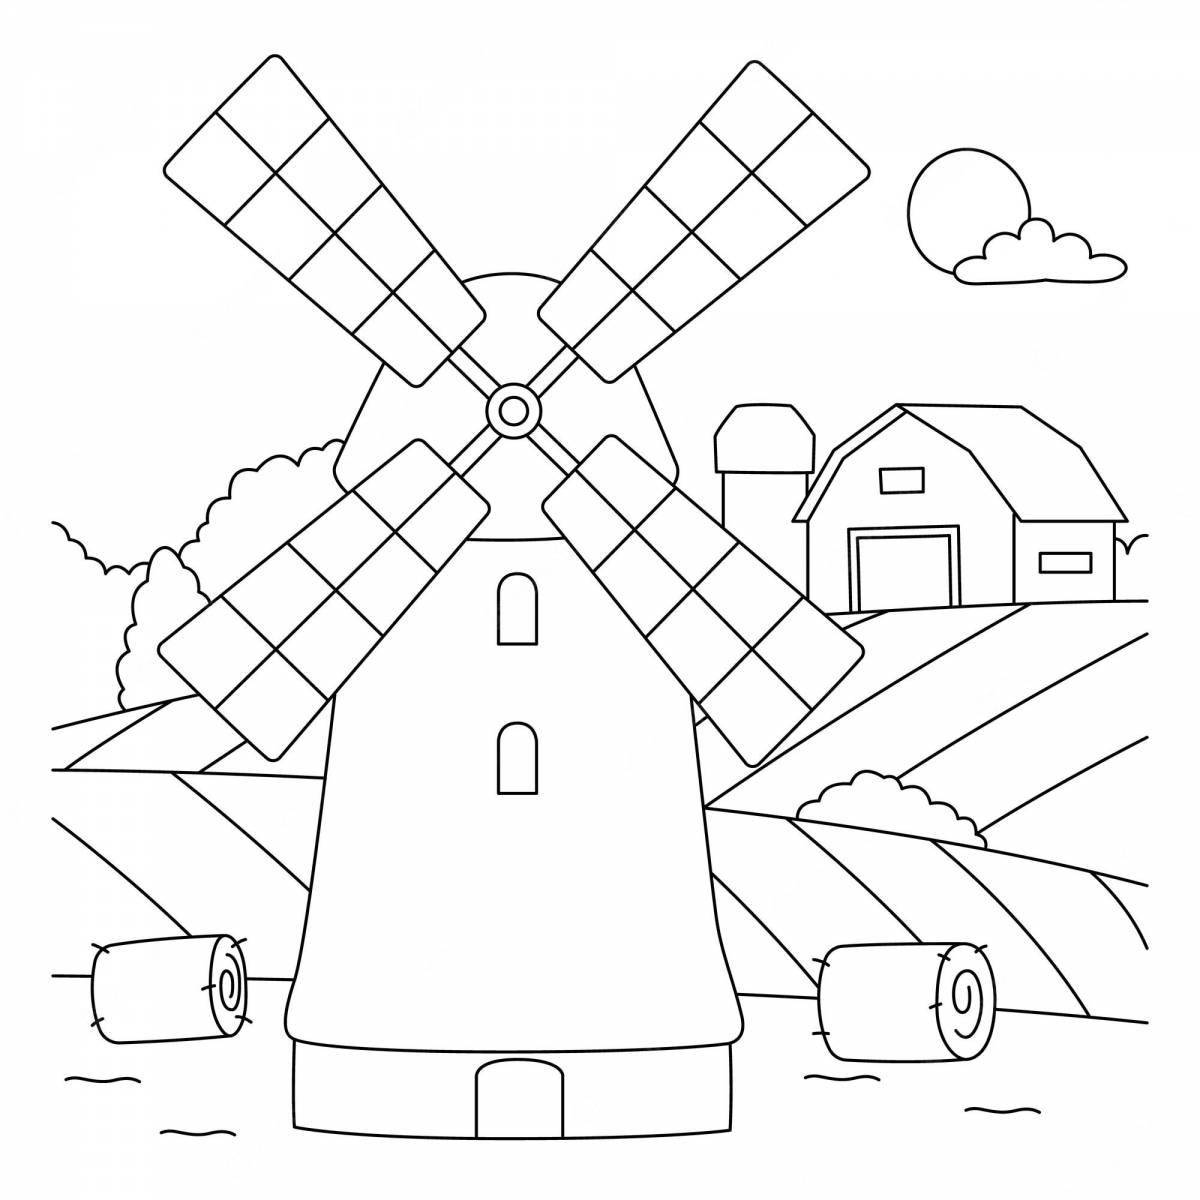 Vibrant windmill coloring pages for children